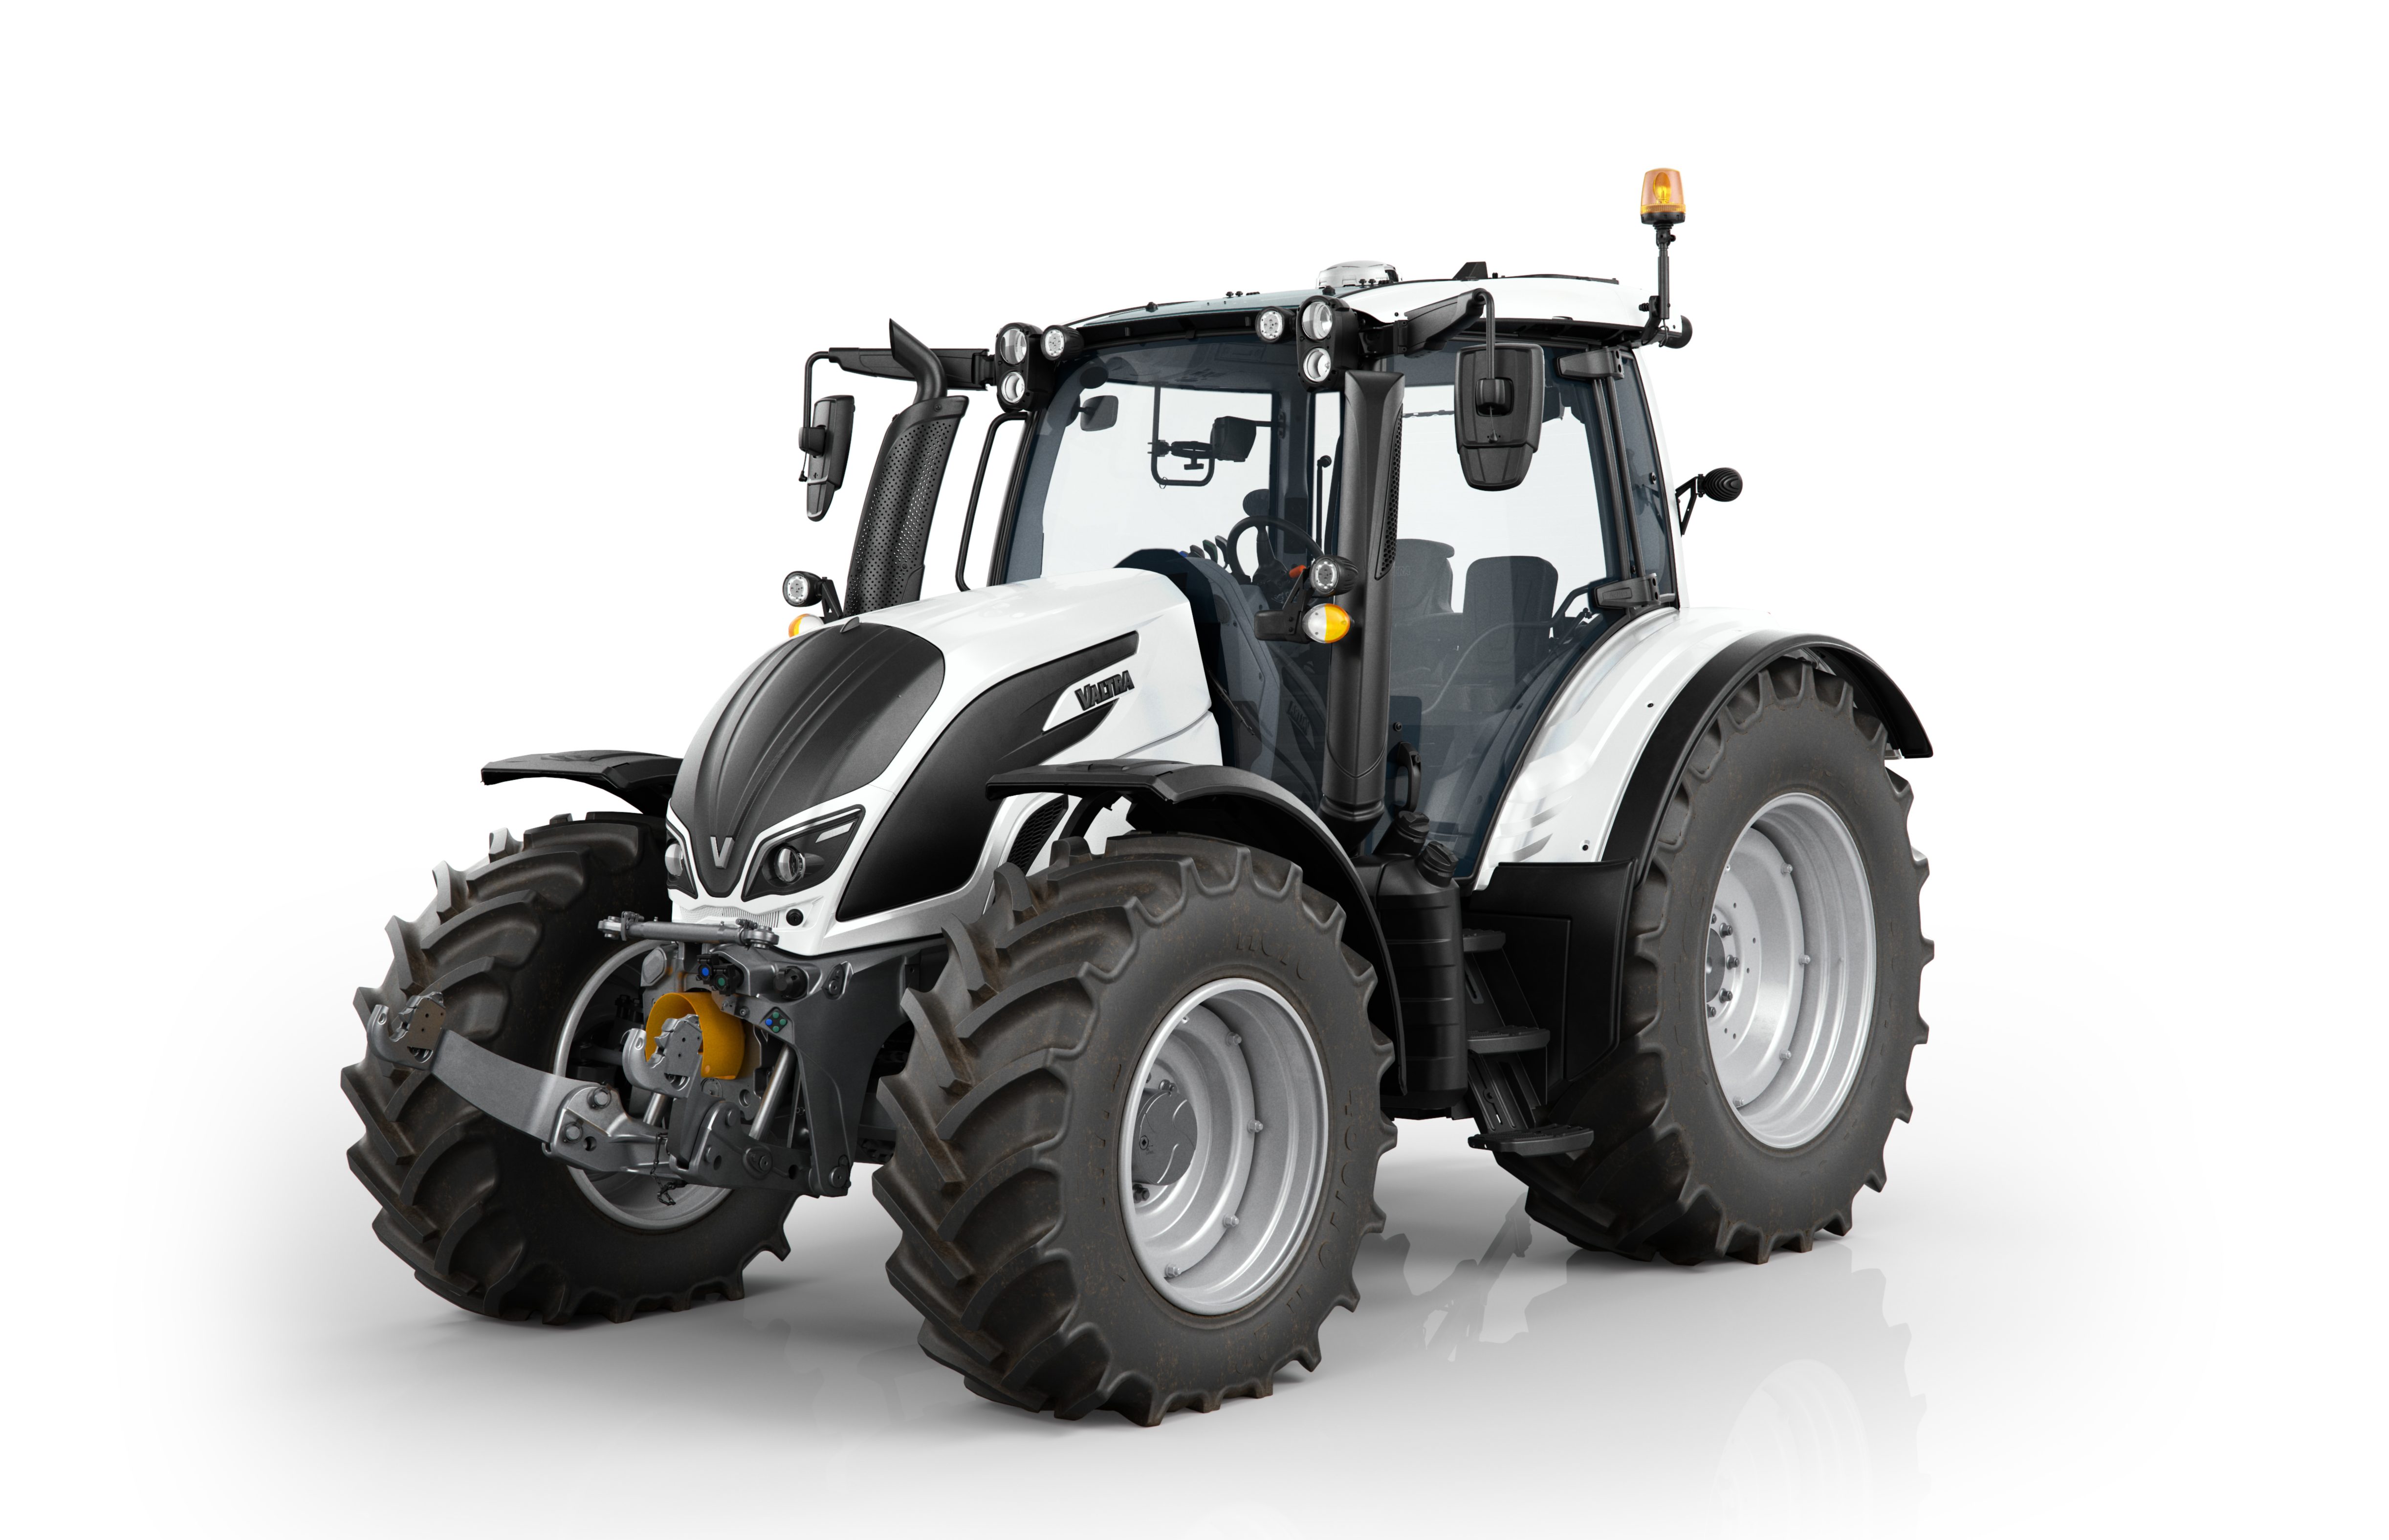 High Quality Tuning Files Valtra Tractor T 151 6-6600 CR Sisu Power 160hp